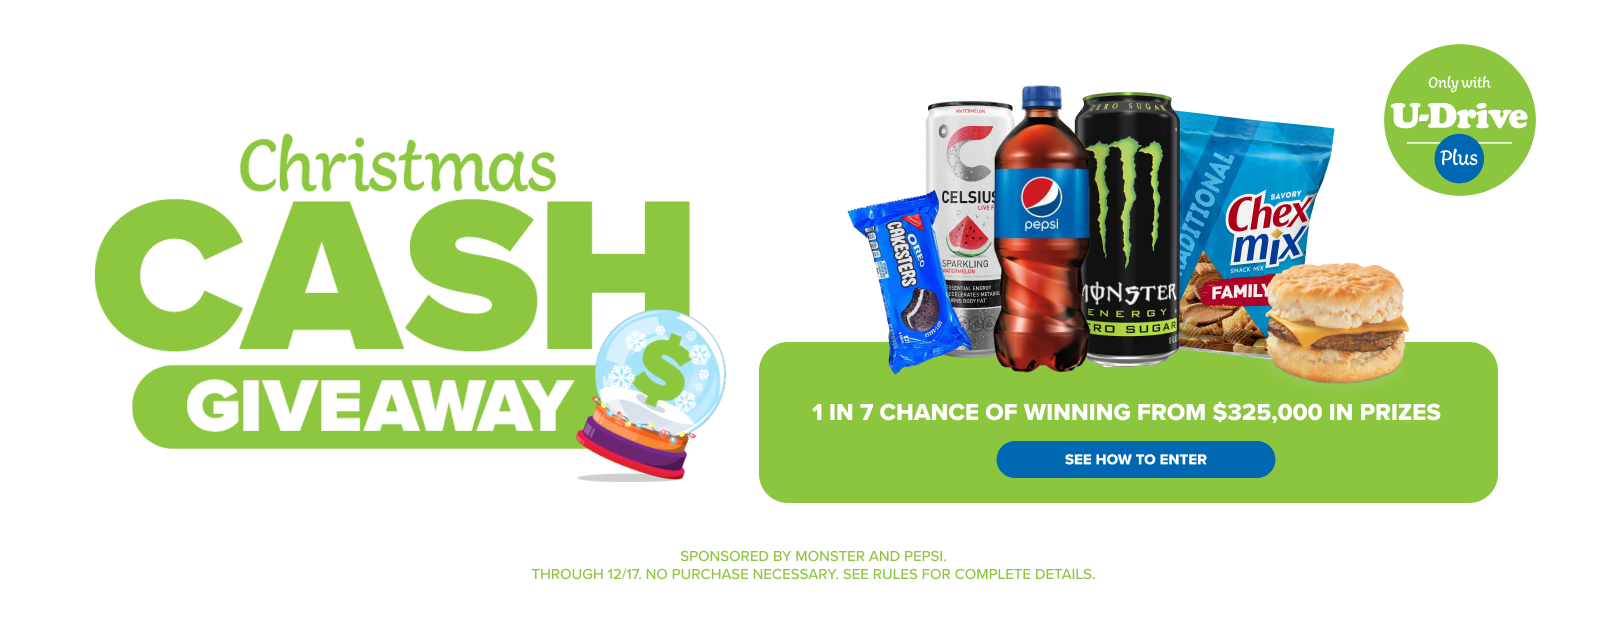 Click here for official rules of the UDF Christmas Cash Giveaway